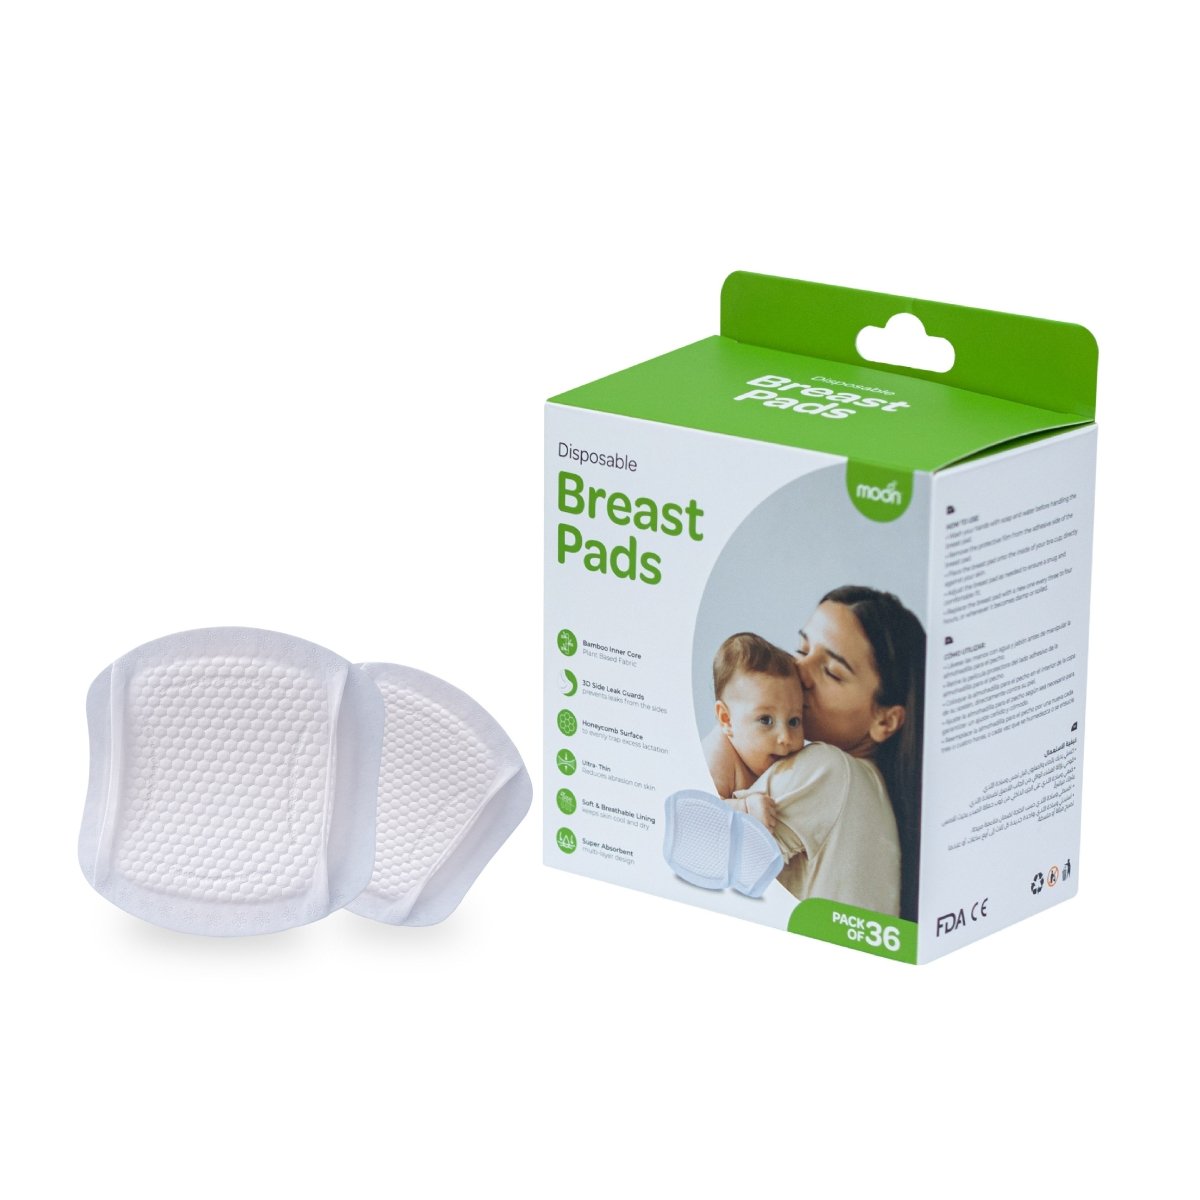 Moon Disposible Breast Pads Maternity Accessories White Adult - MNSDPMT01